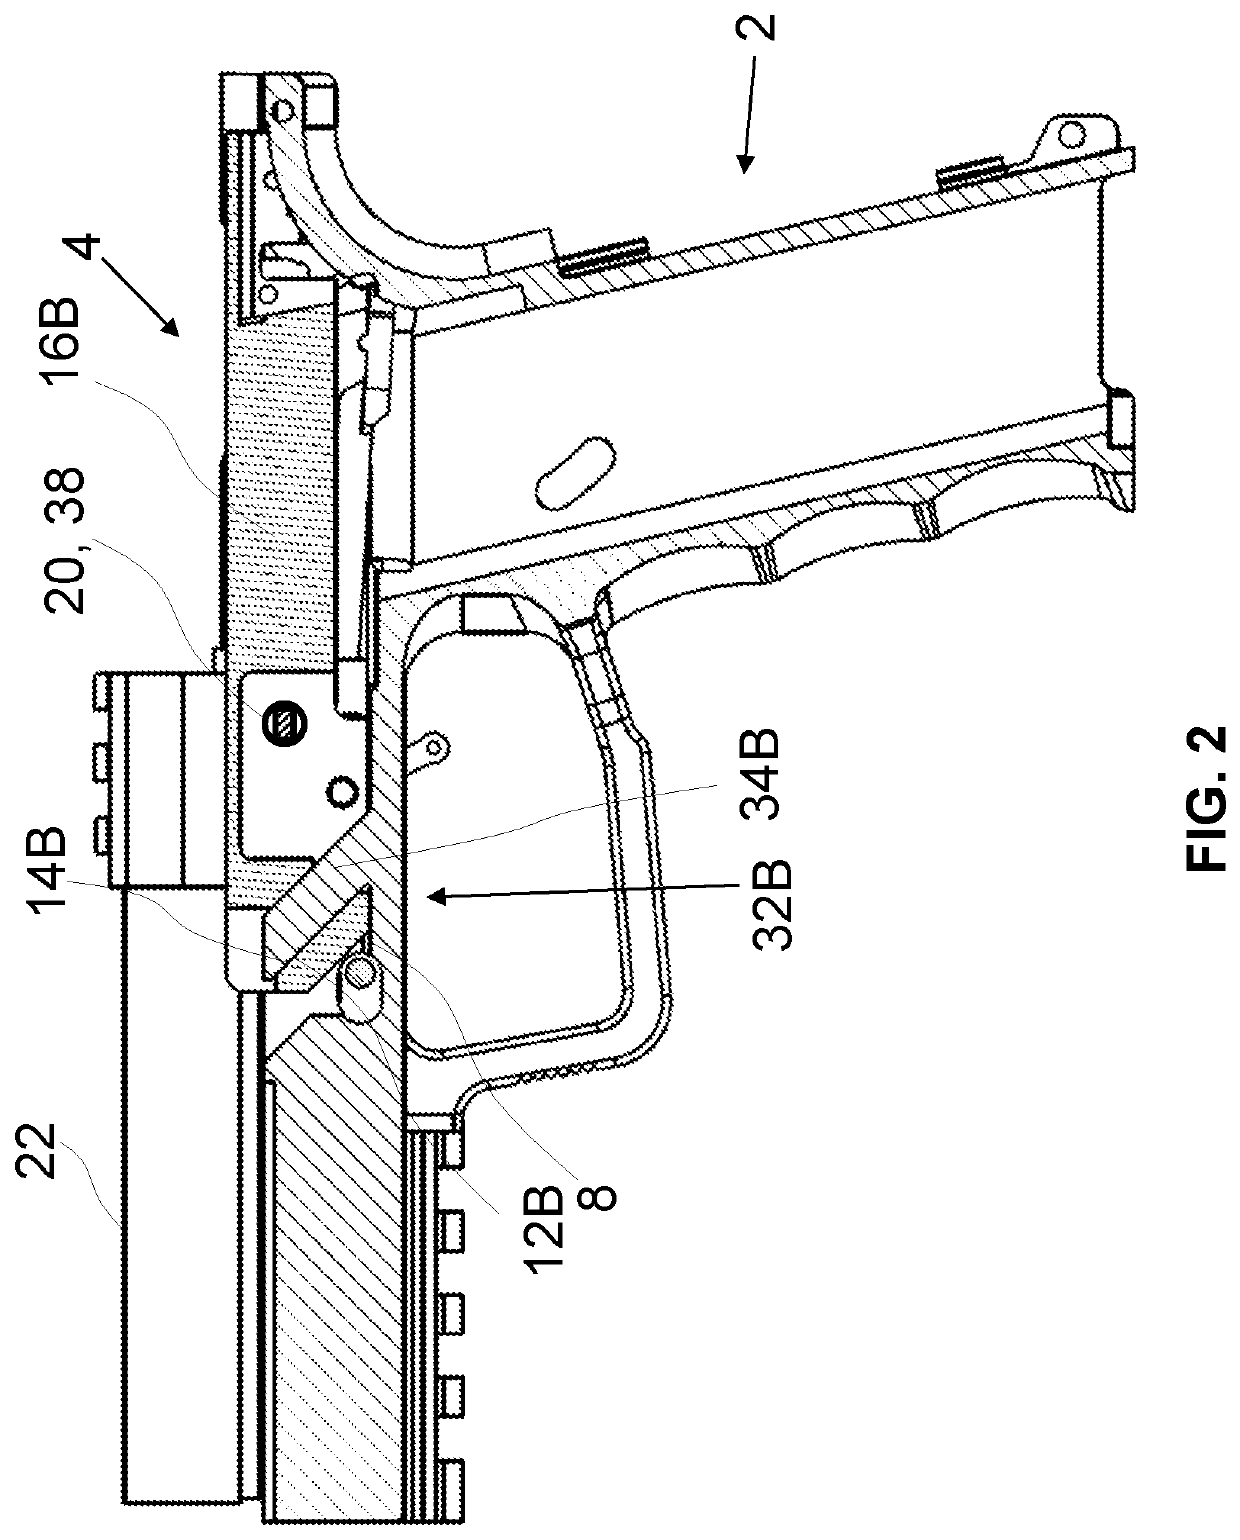 Pistol with optimized chassis anchoring